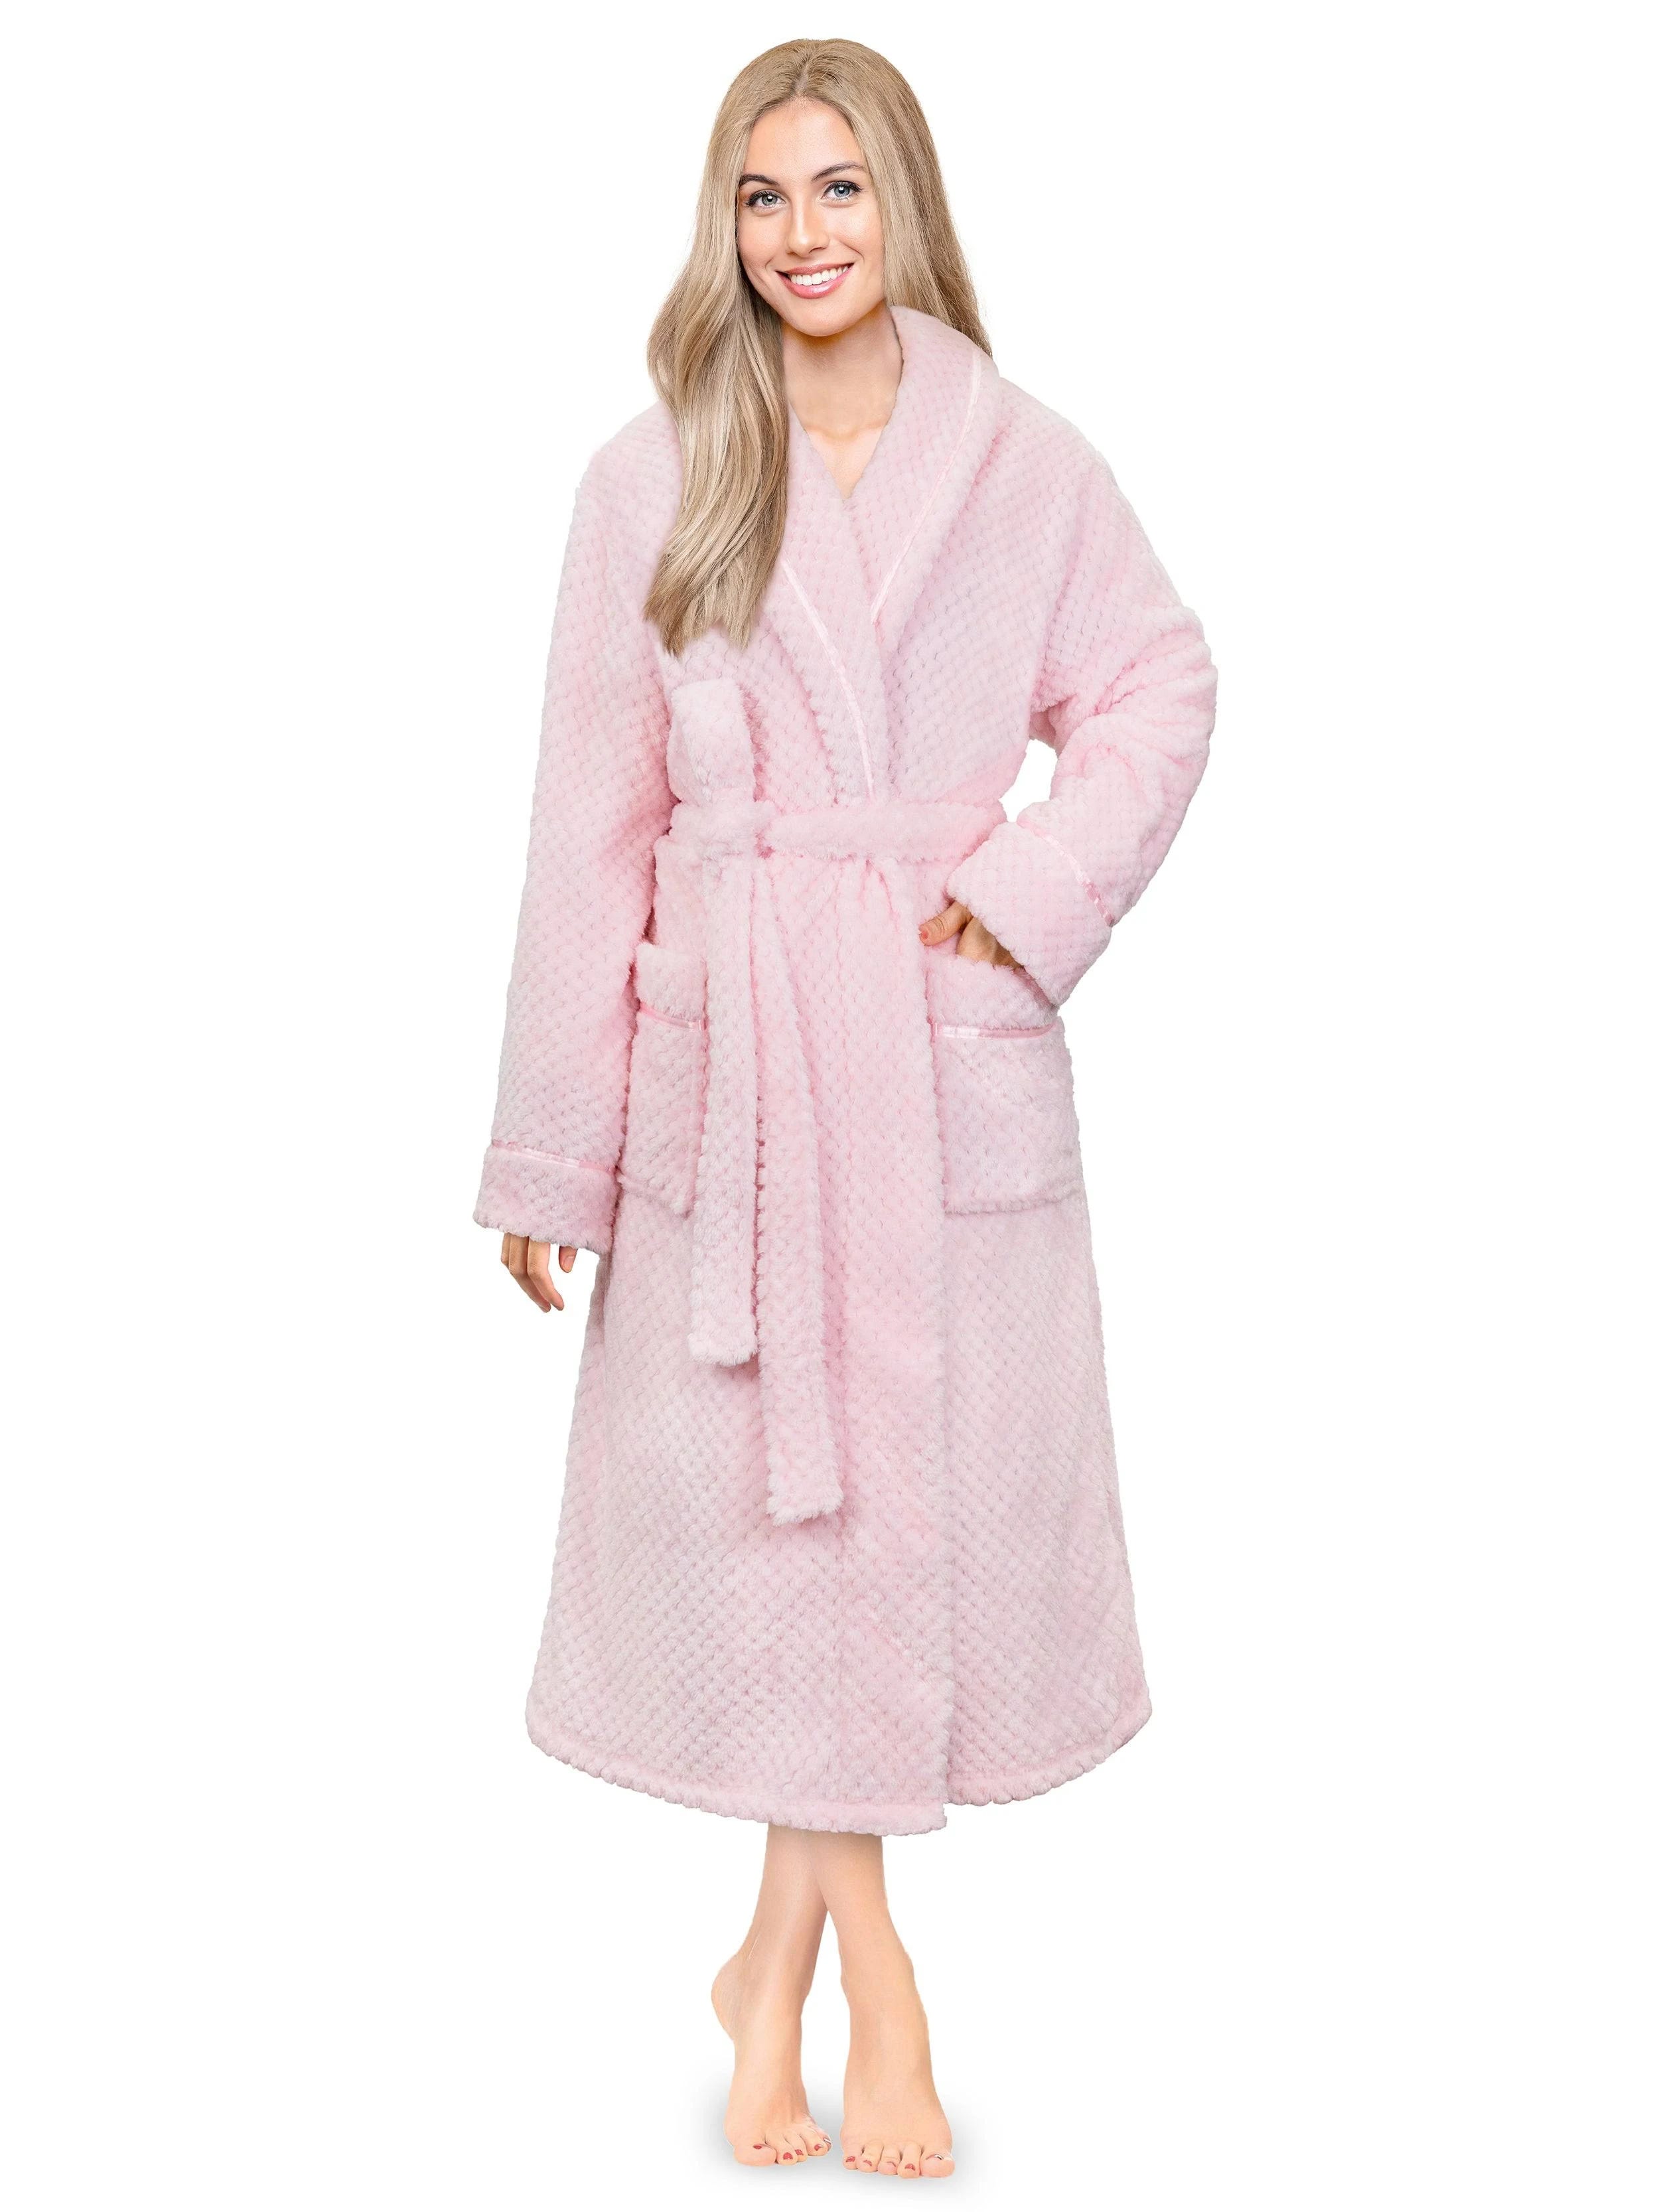 Soft Fleece Robe for Women: Light Pink with Satin Trim | Image